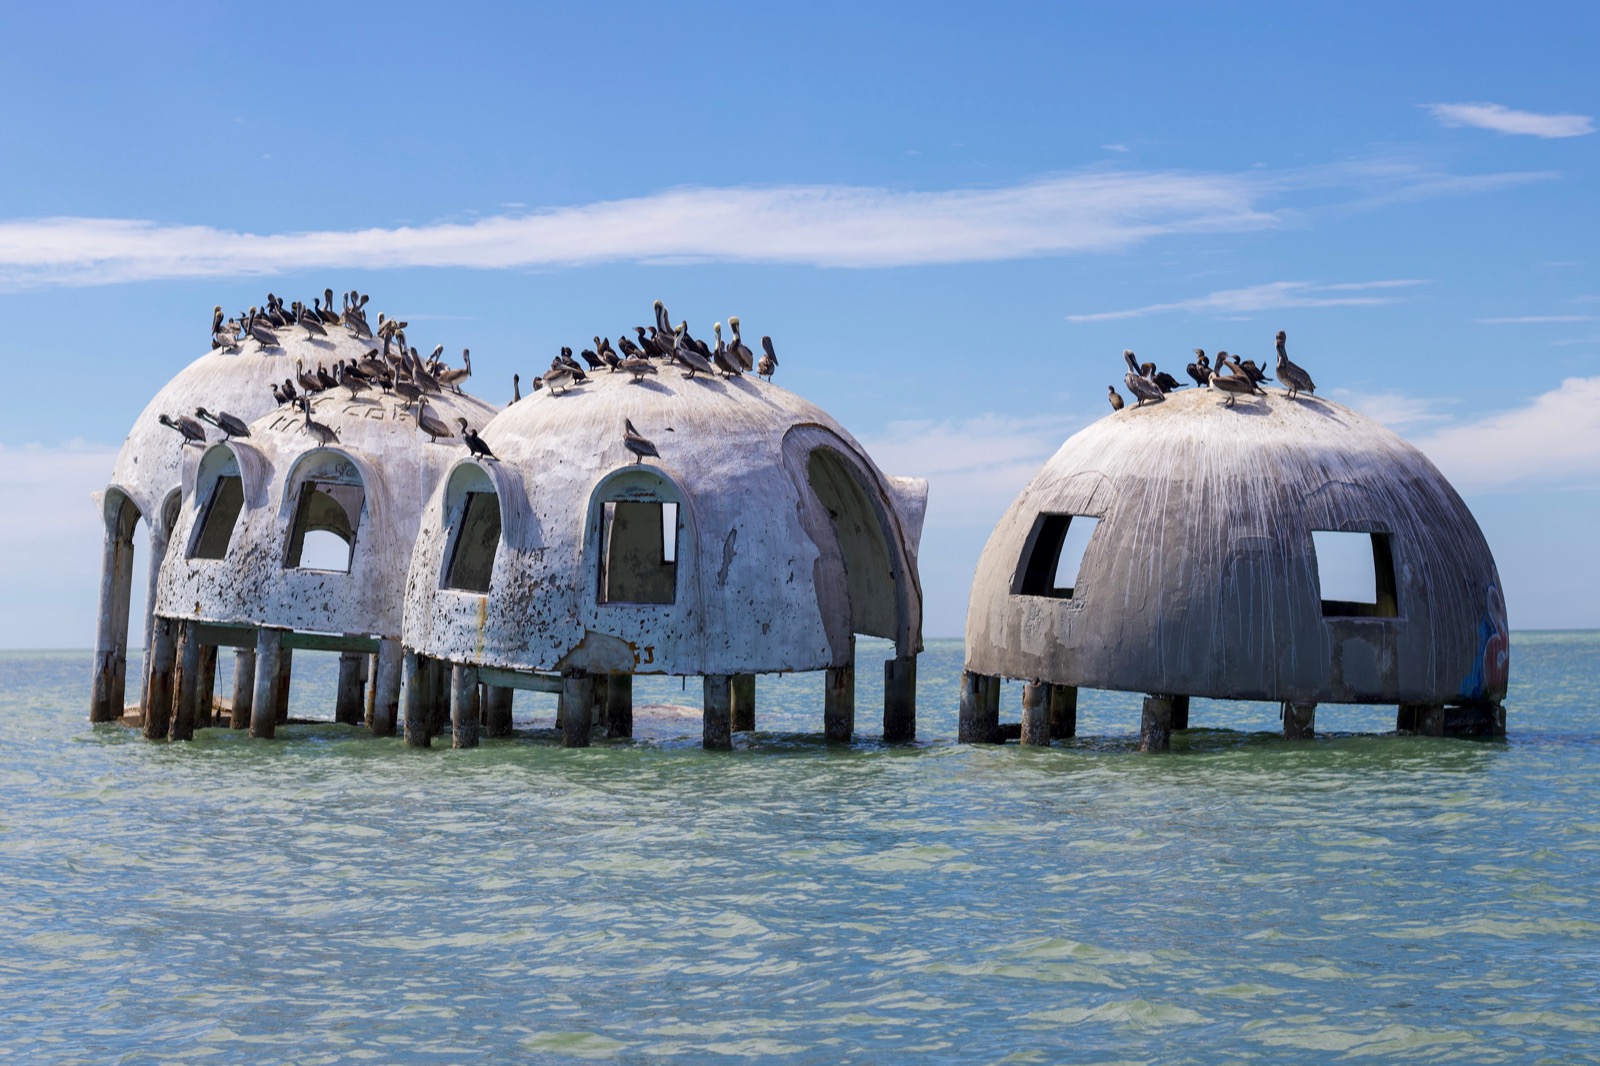 three dome-shaped concrete structures with holes that used to be windows. they sit on beams sticking out of the water, and some lean akwardly. dozens of seagulls perch on them